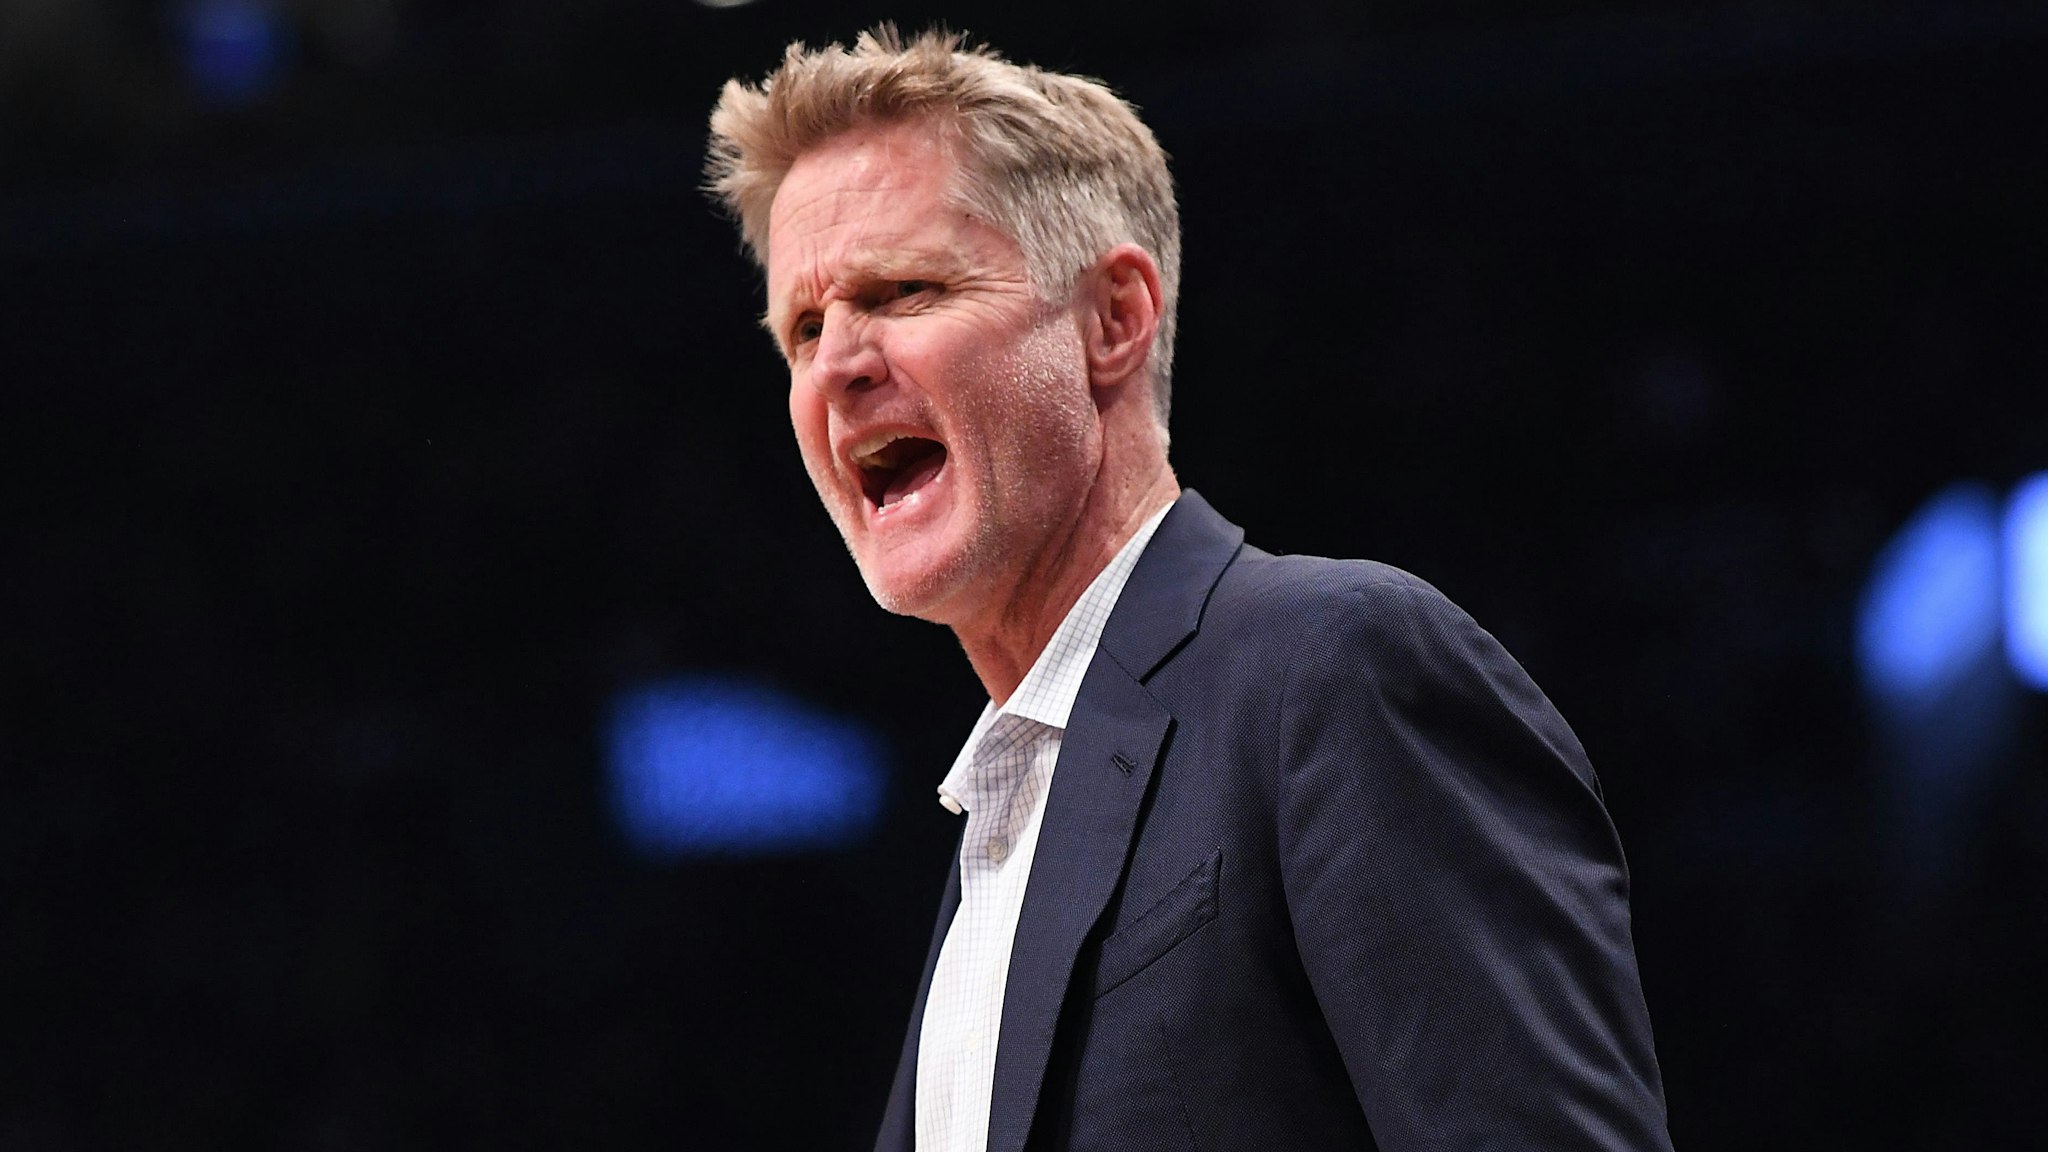 Head Coach Steve Kerr of the Golden State Warriors reacts during the game against the Brooklyn Nets at Barclays Center on October 28, 2018 in the Brooklyn borough of New York City.